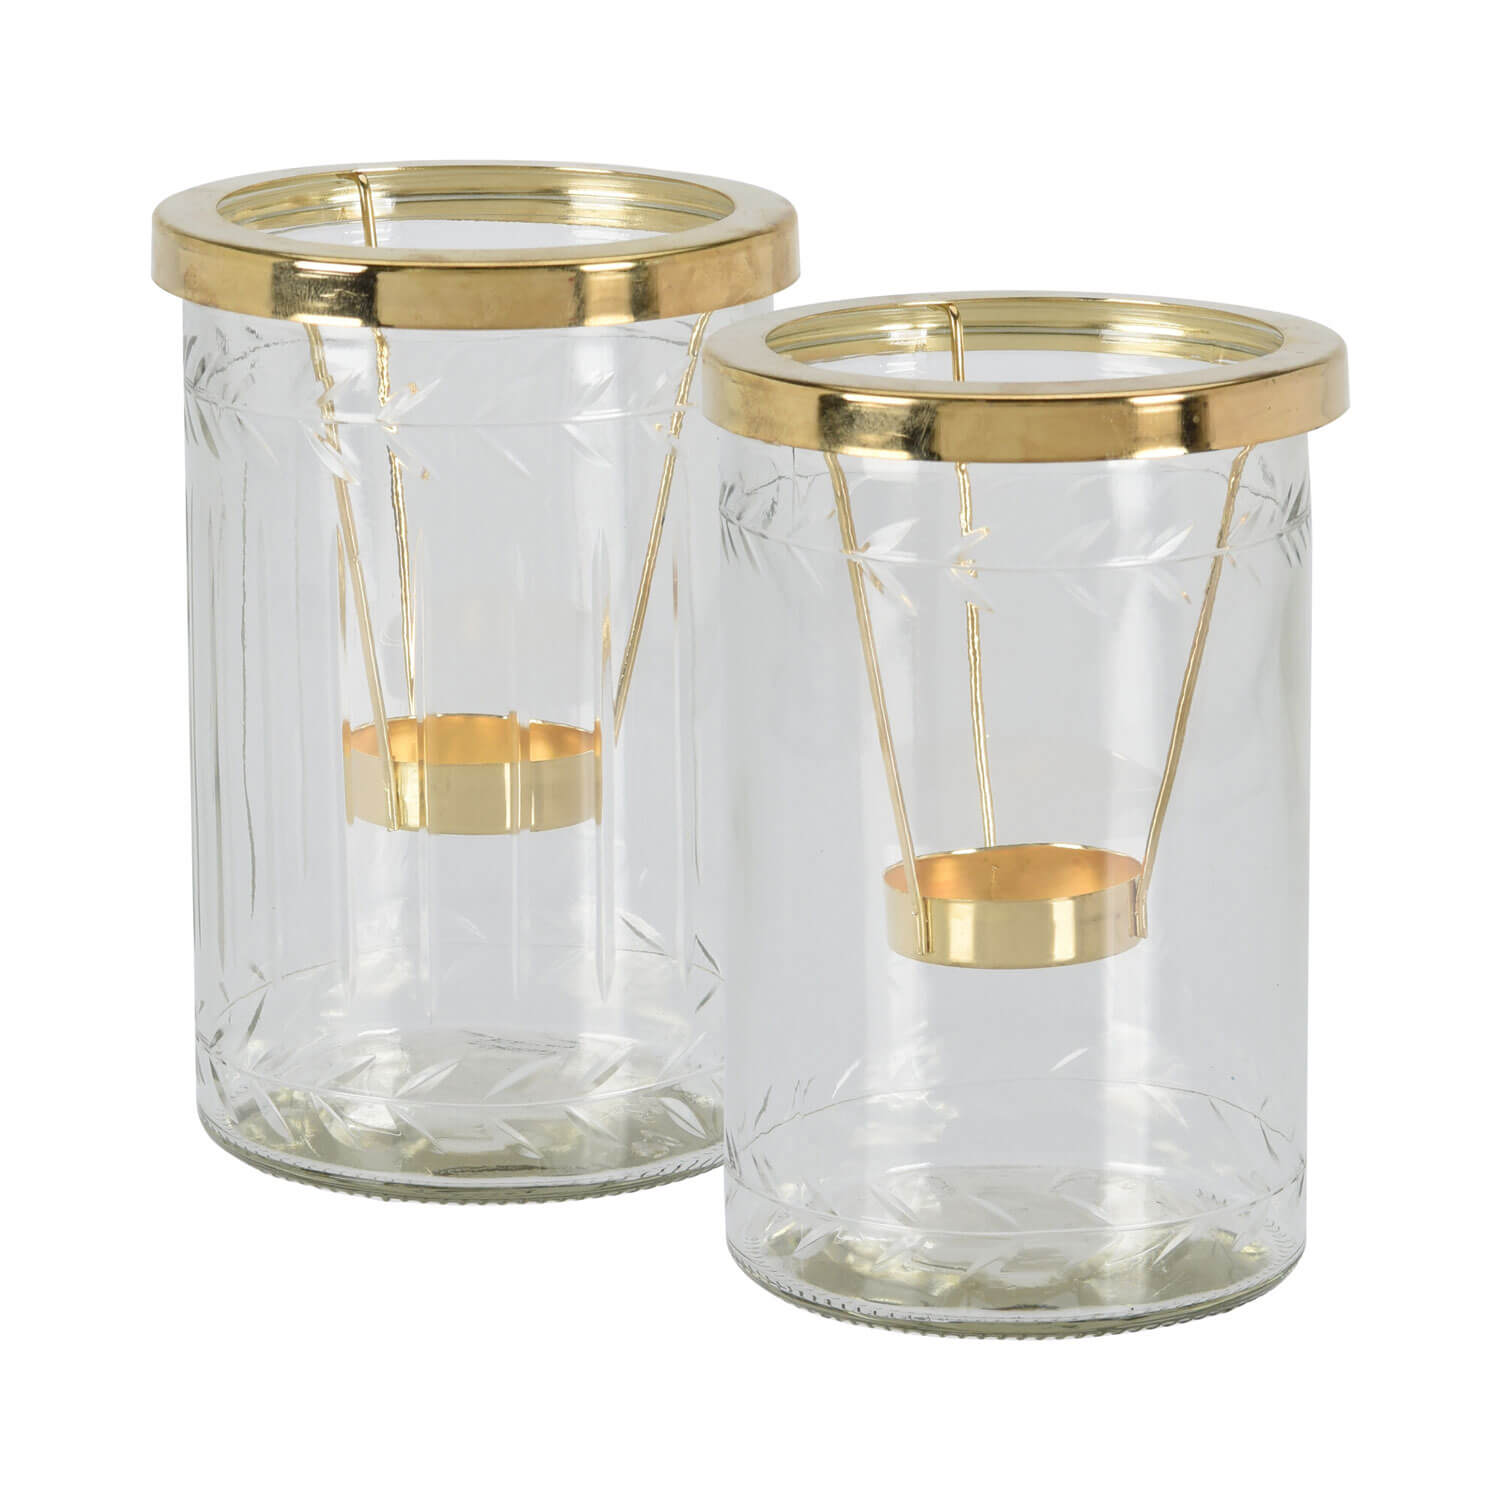 The Home Collection Tea Light Holder 1 Shaws Department Stores